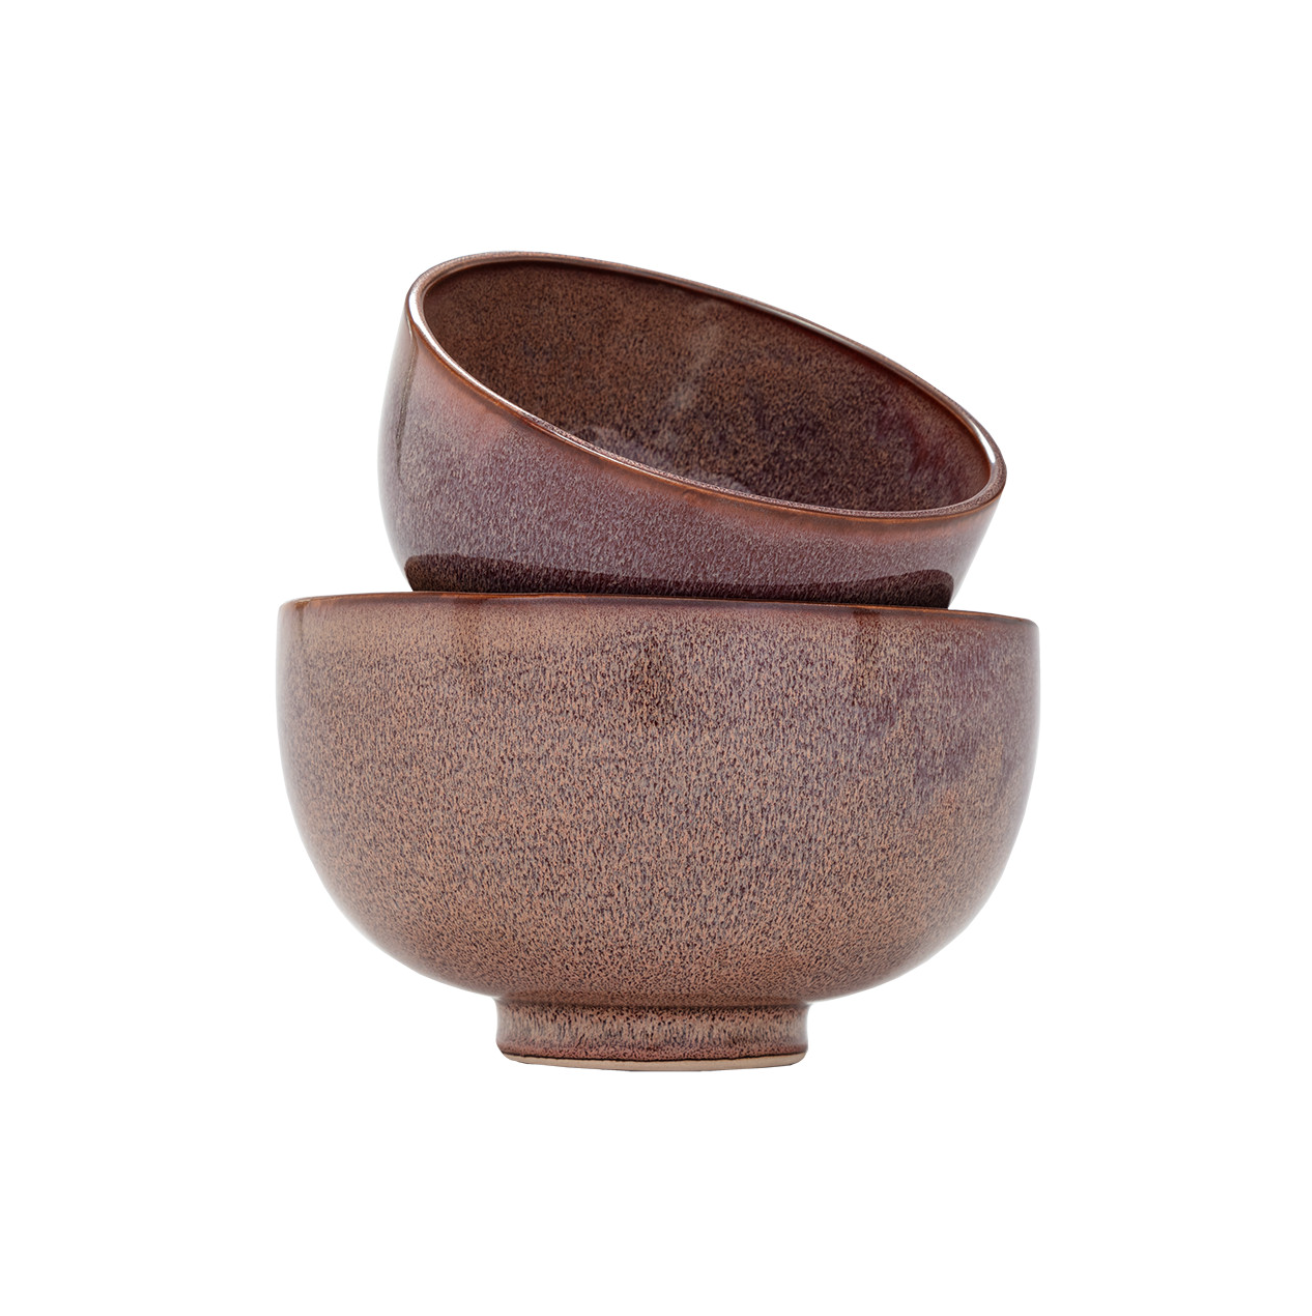 Two stacked Linden Bowls from The Import Collection, designed in a bungalow style, with the top one tilted, against a white background. The bowls have a textured brown finish.